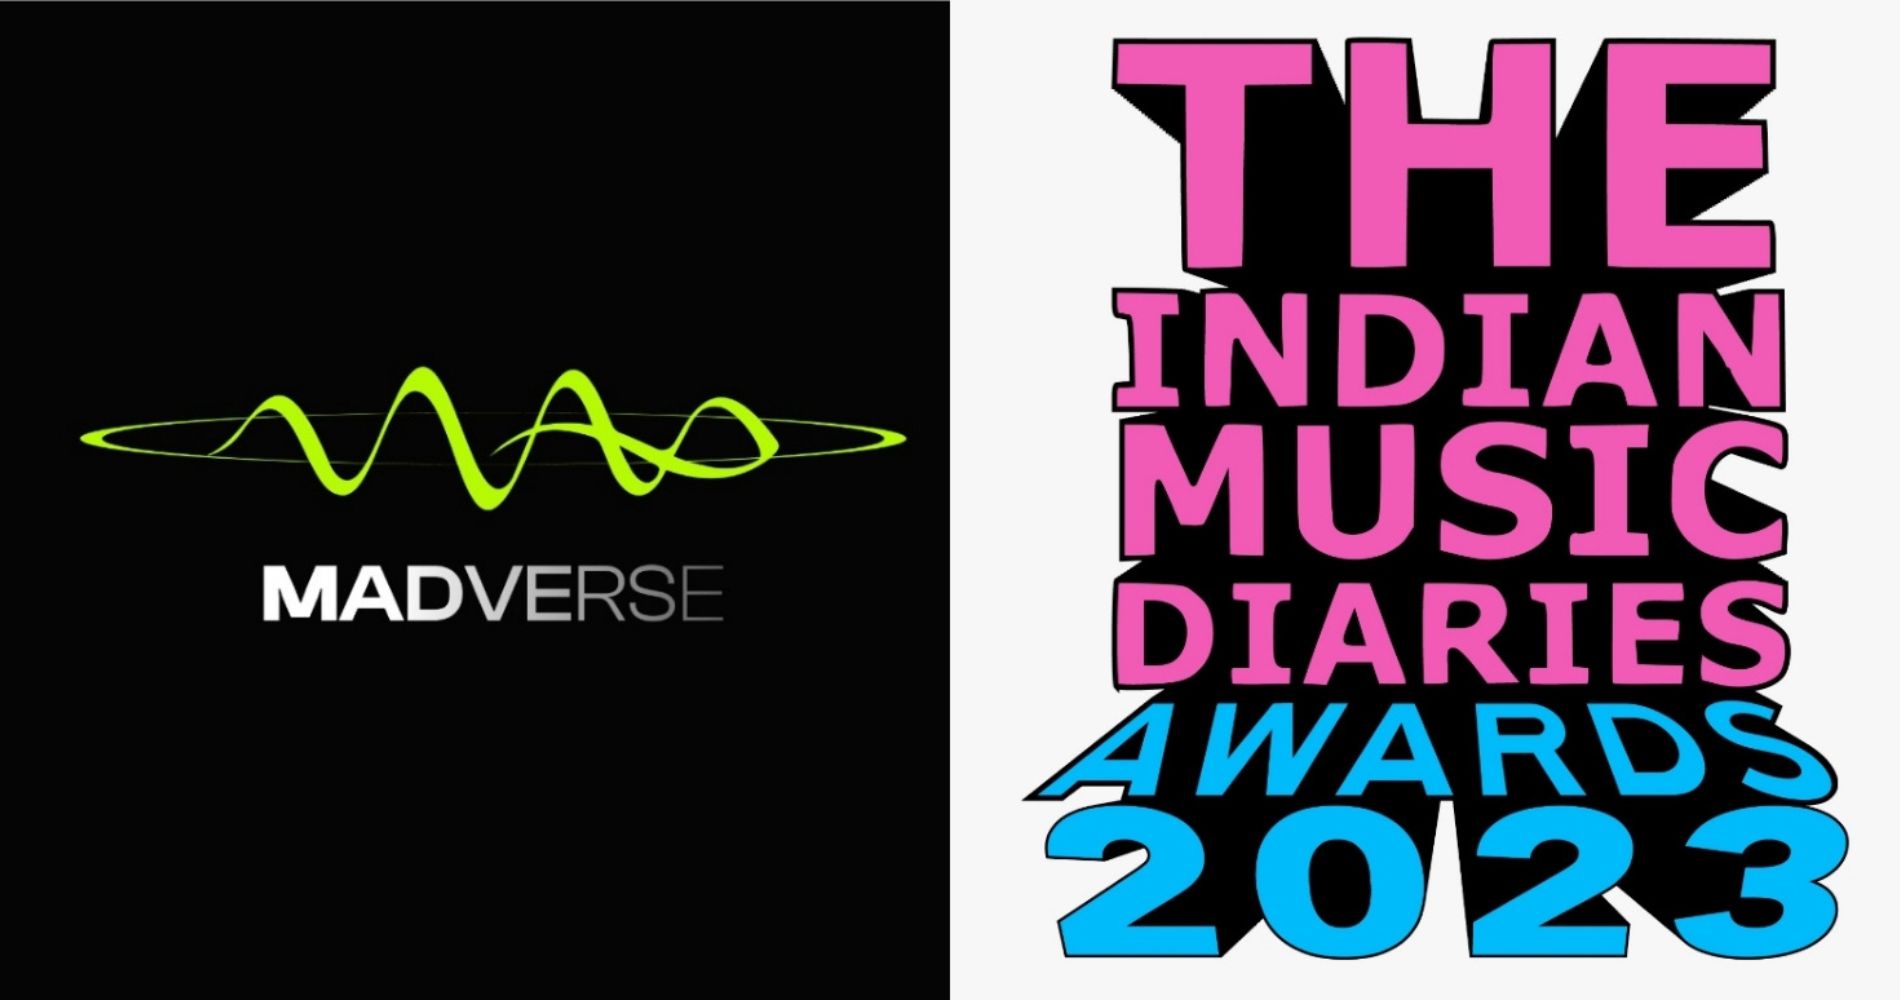 MADverse and Indian Music Diaries Join Forces to Revolutionise the Independent Music Scene in India